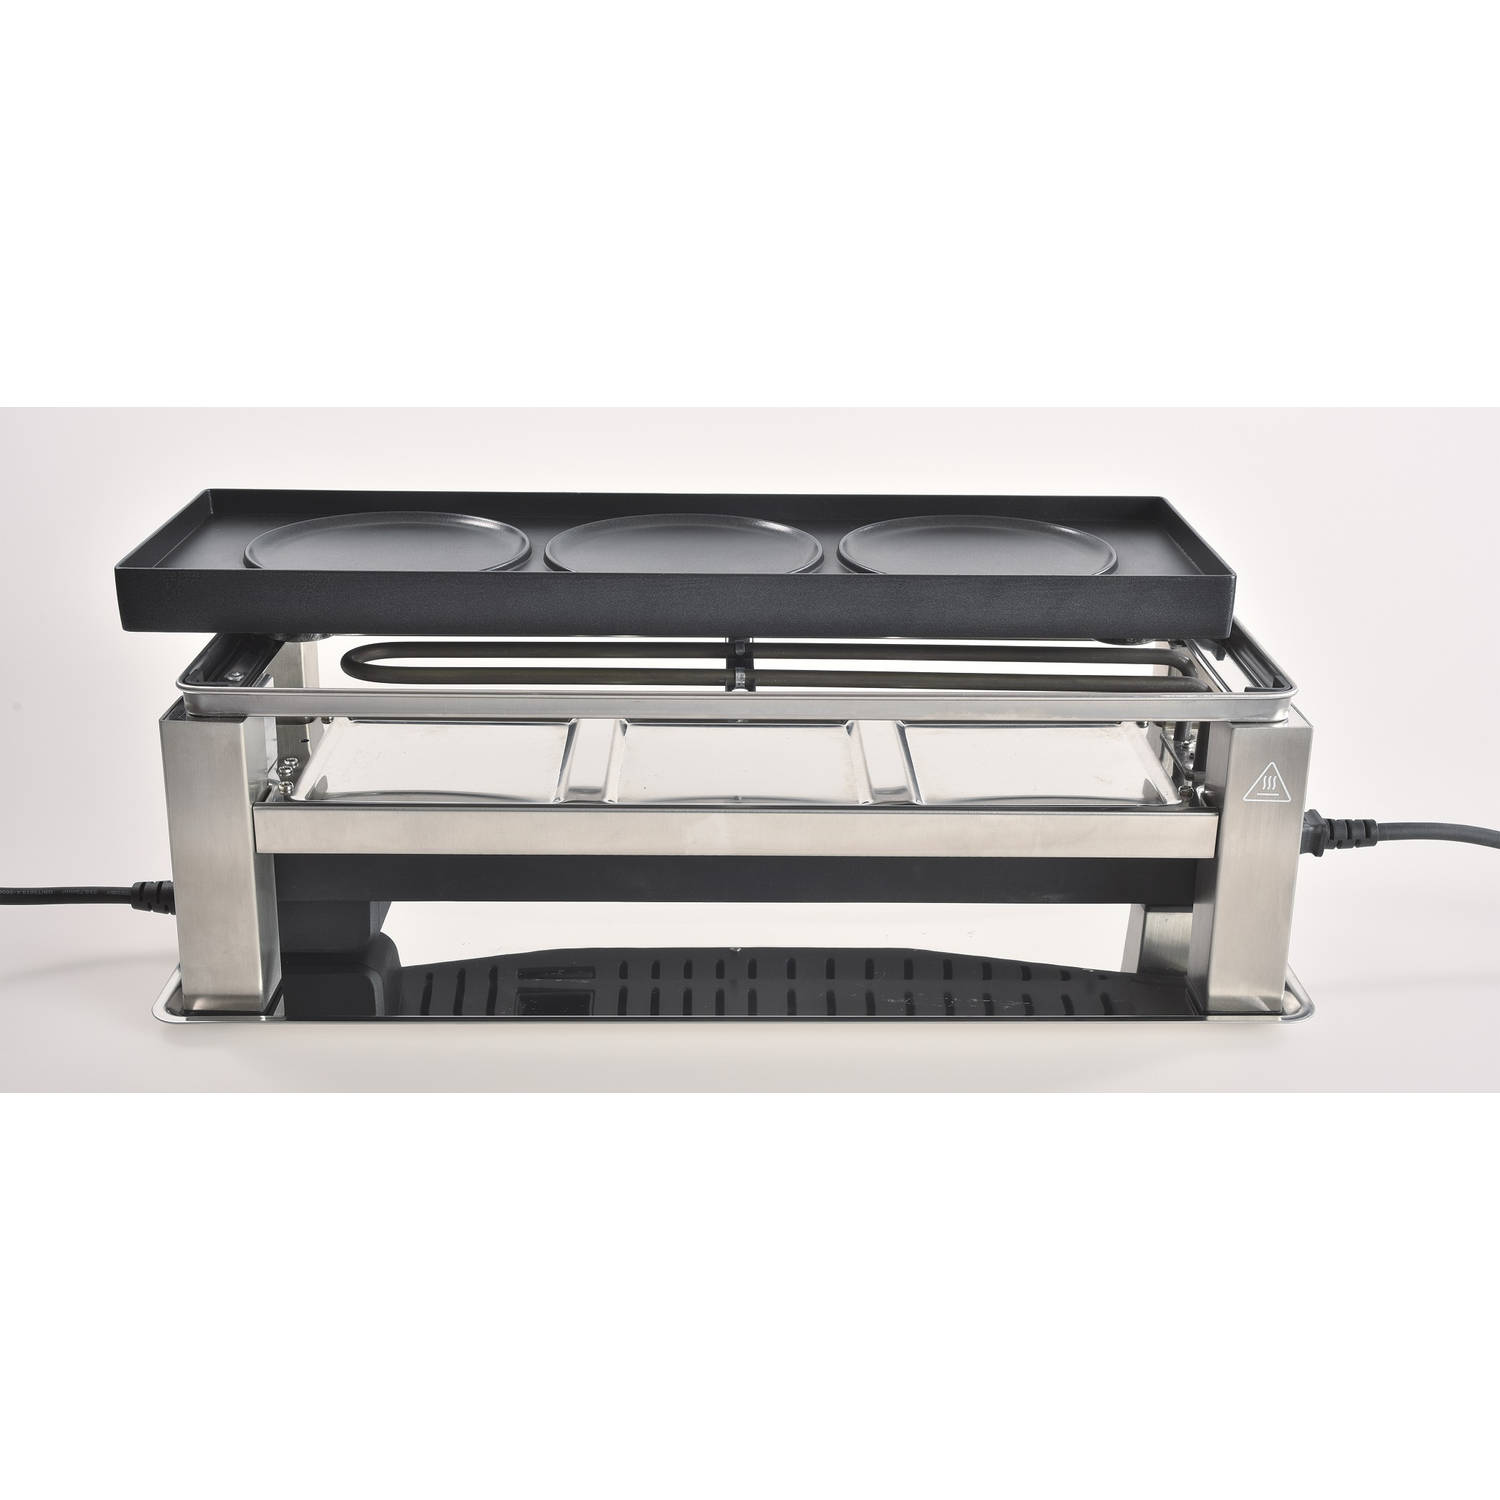 Solis 4 in 1 Grill - Grill | Blokker